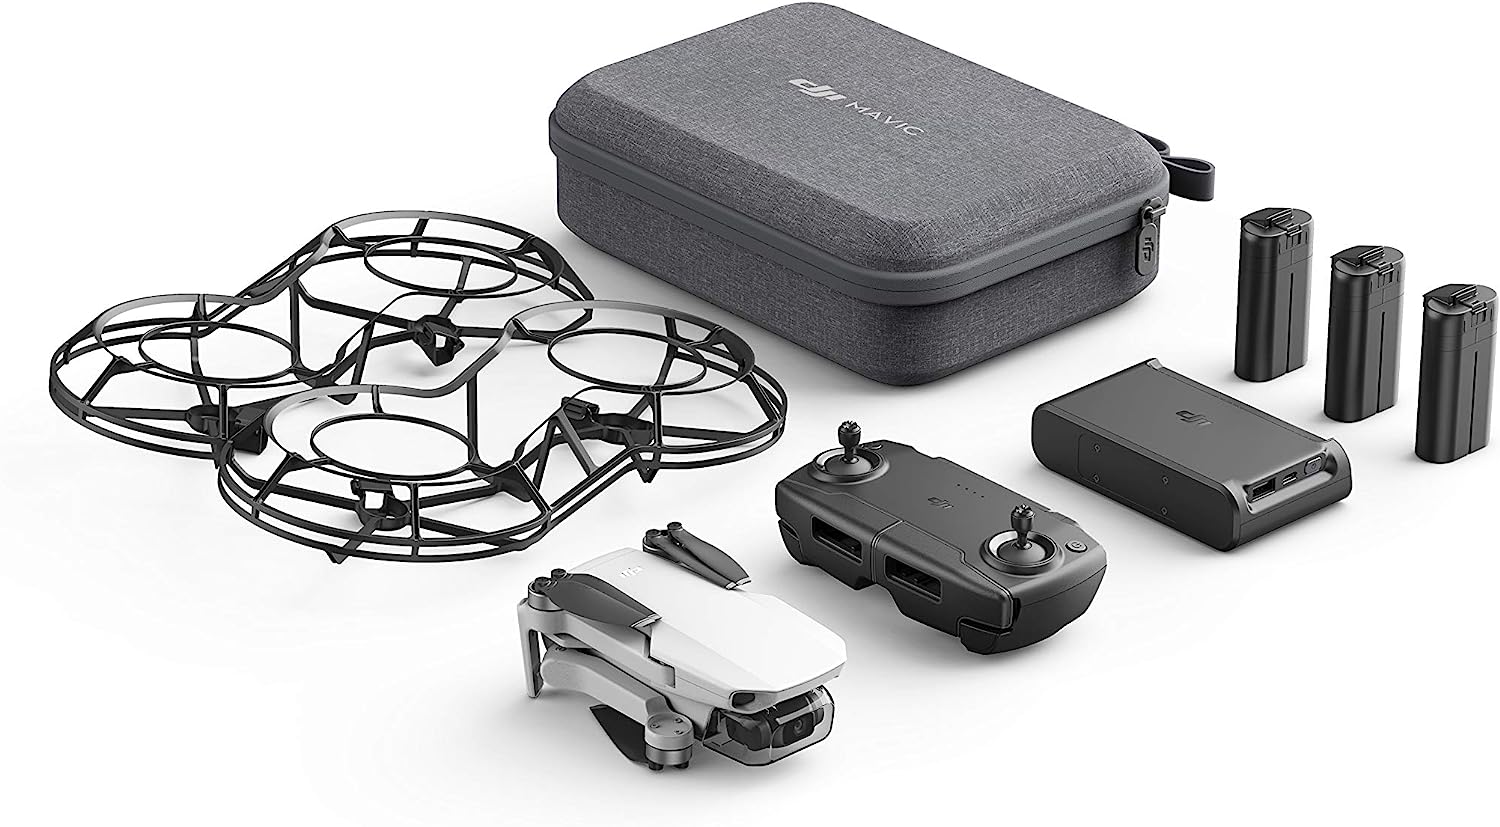 DJI Mavic Mini Fly More Combo Quadcopter with Remote Controller - Gray (Certified Refurbished)